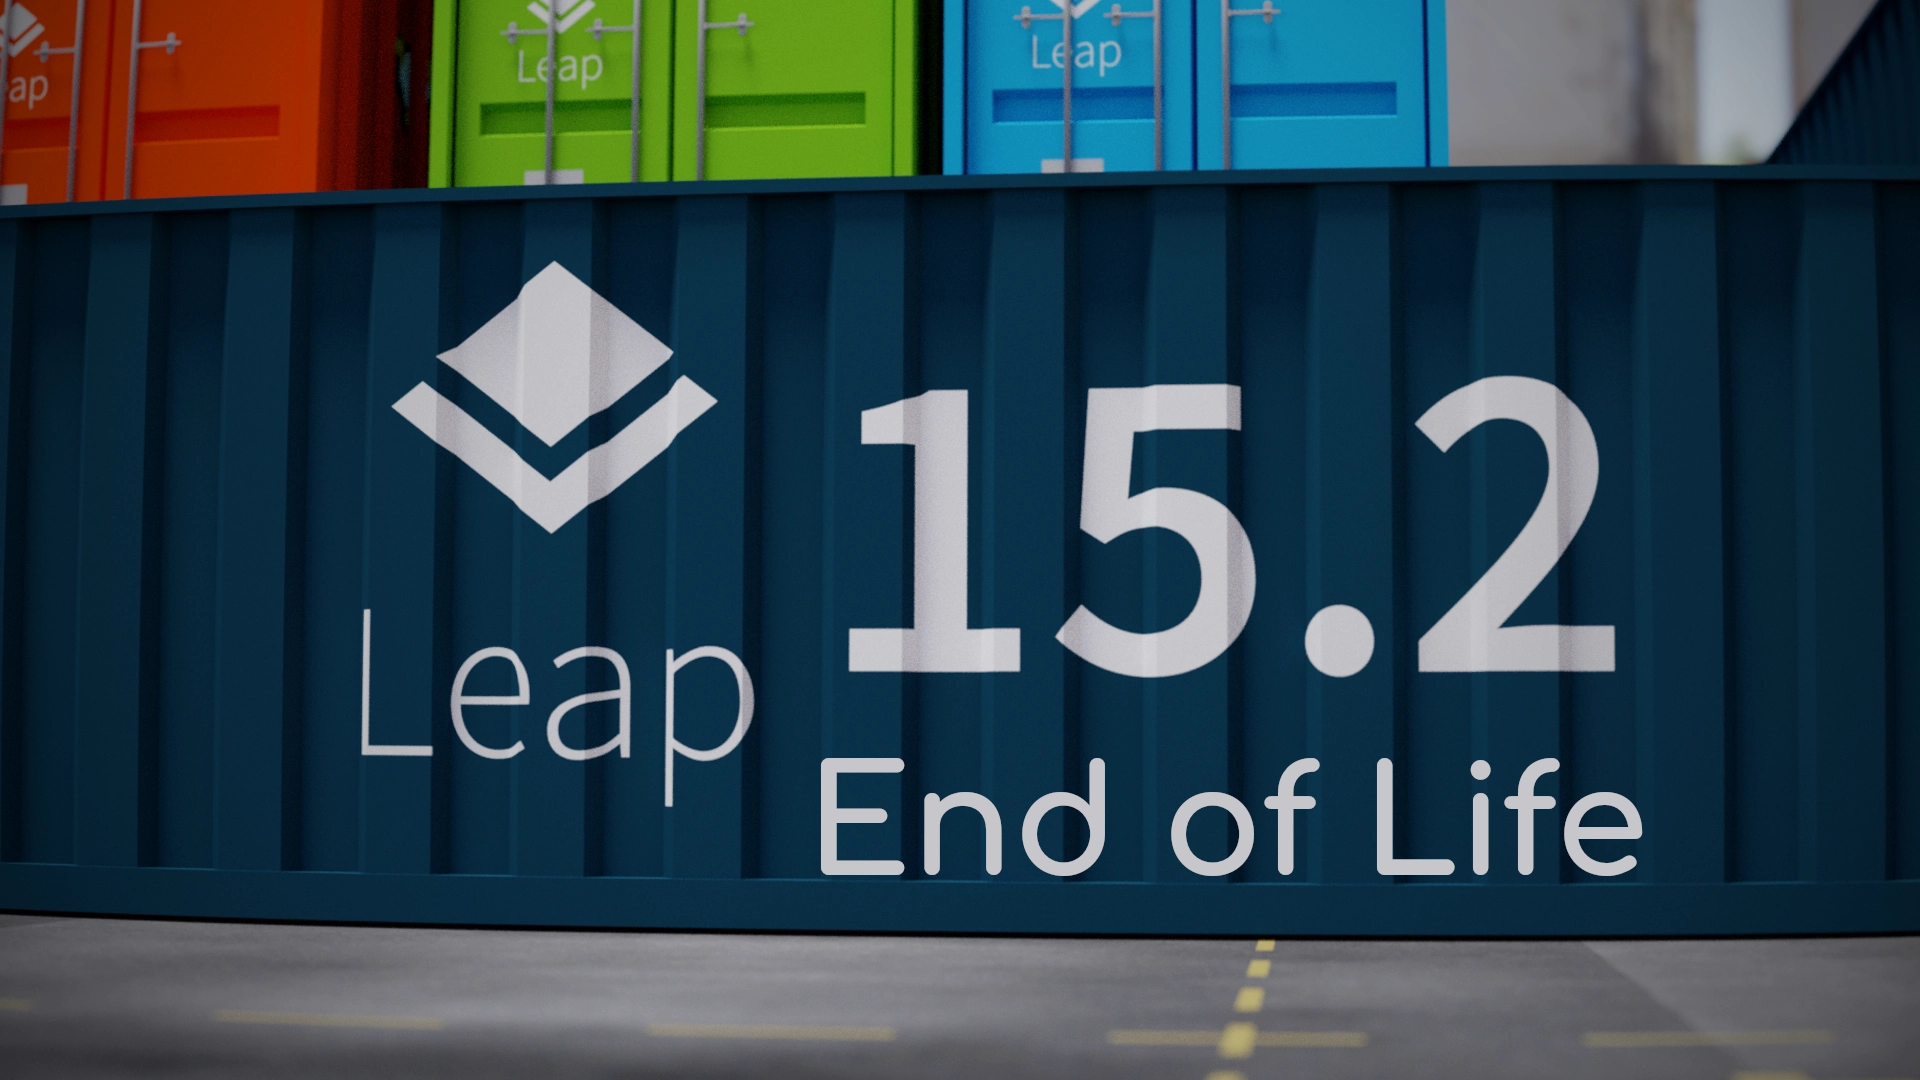 openSUSE Leap 15.2 Reached End of Life, Users Urged to Upgrade to openSUSE Leap 15.3